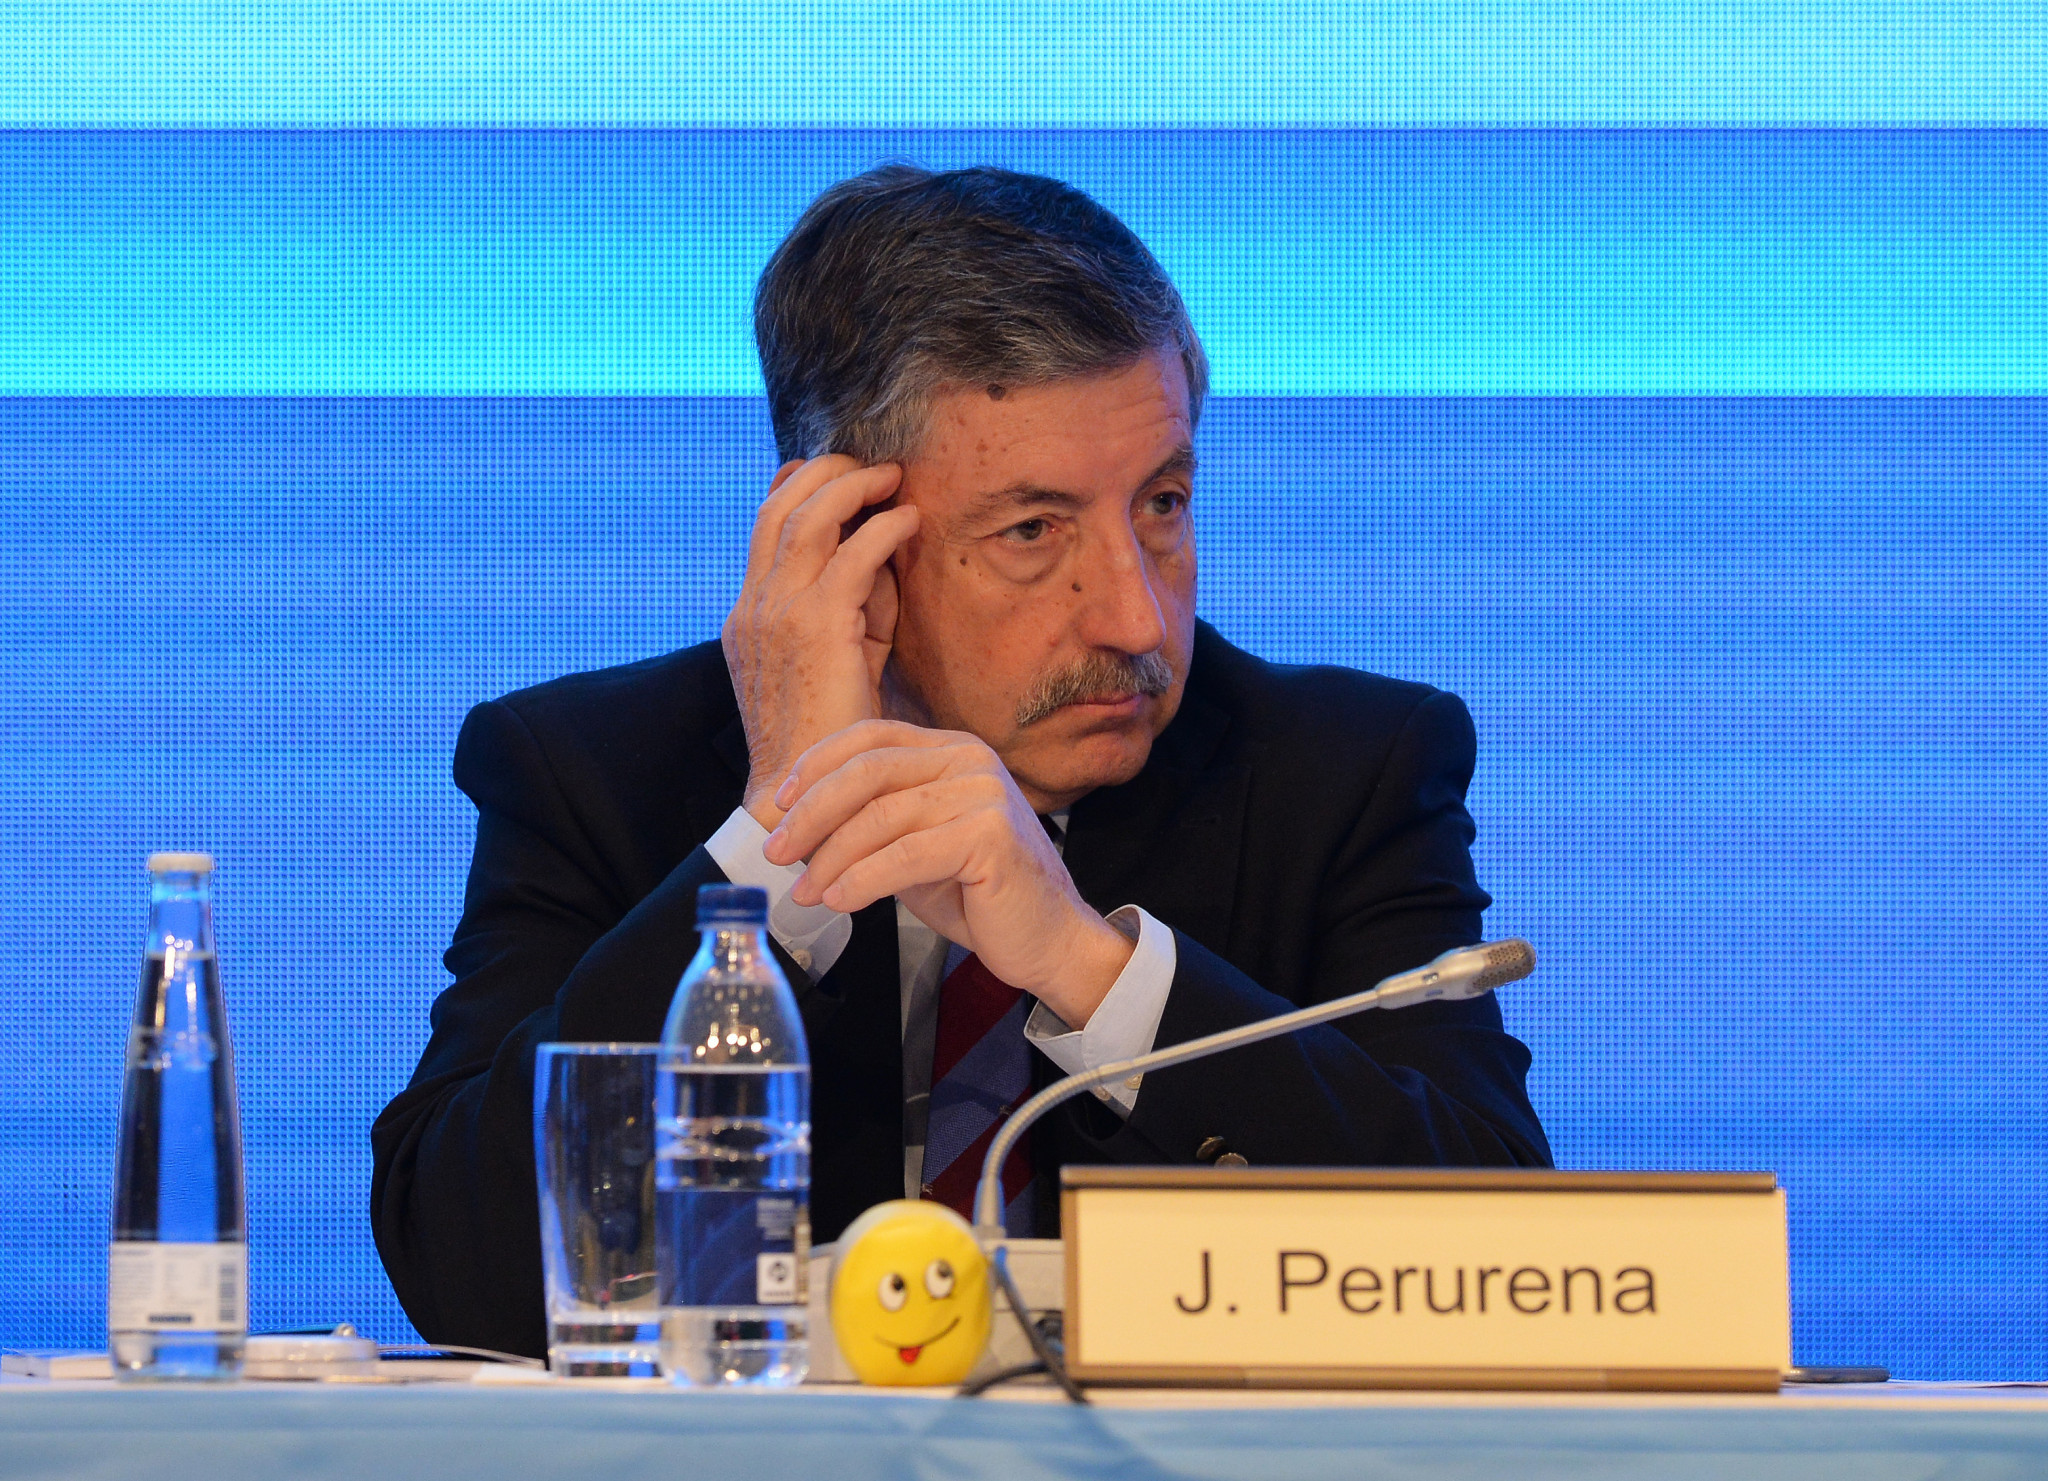 José Perurena looks set to continue in his role as IWGA President ©Getty Images